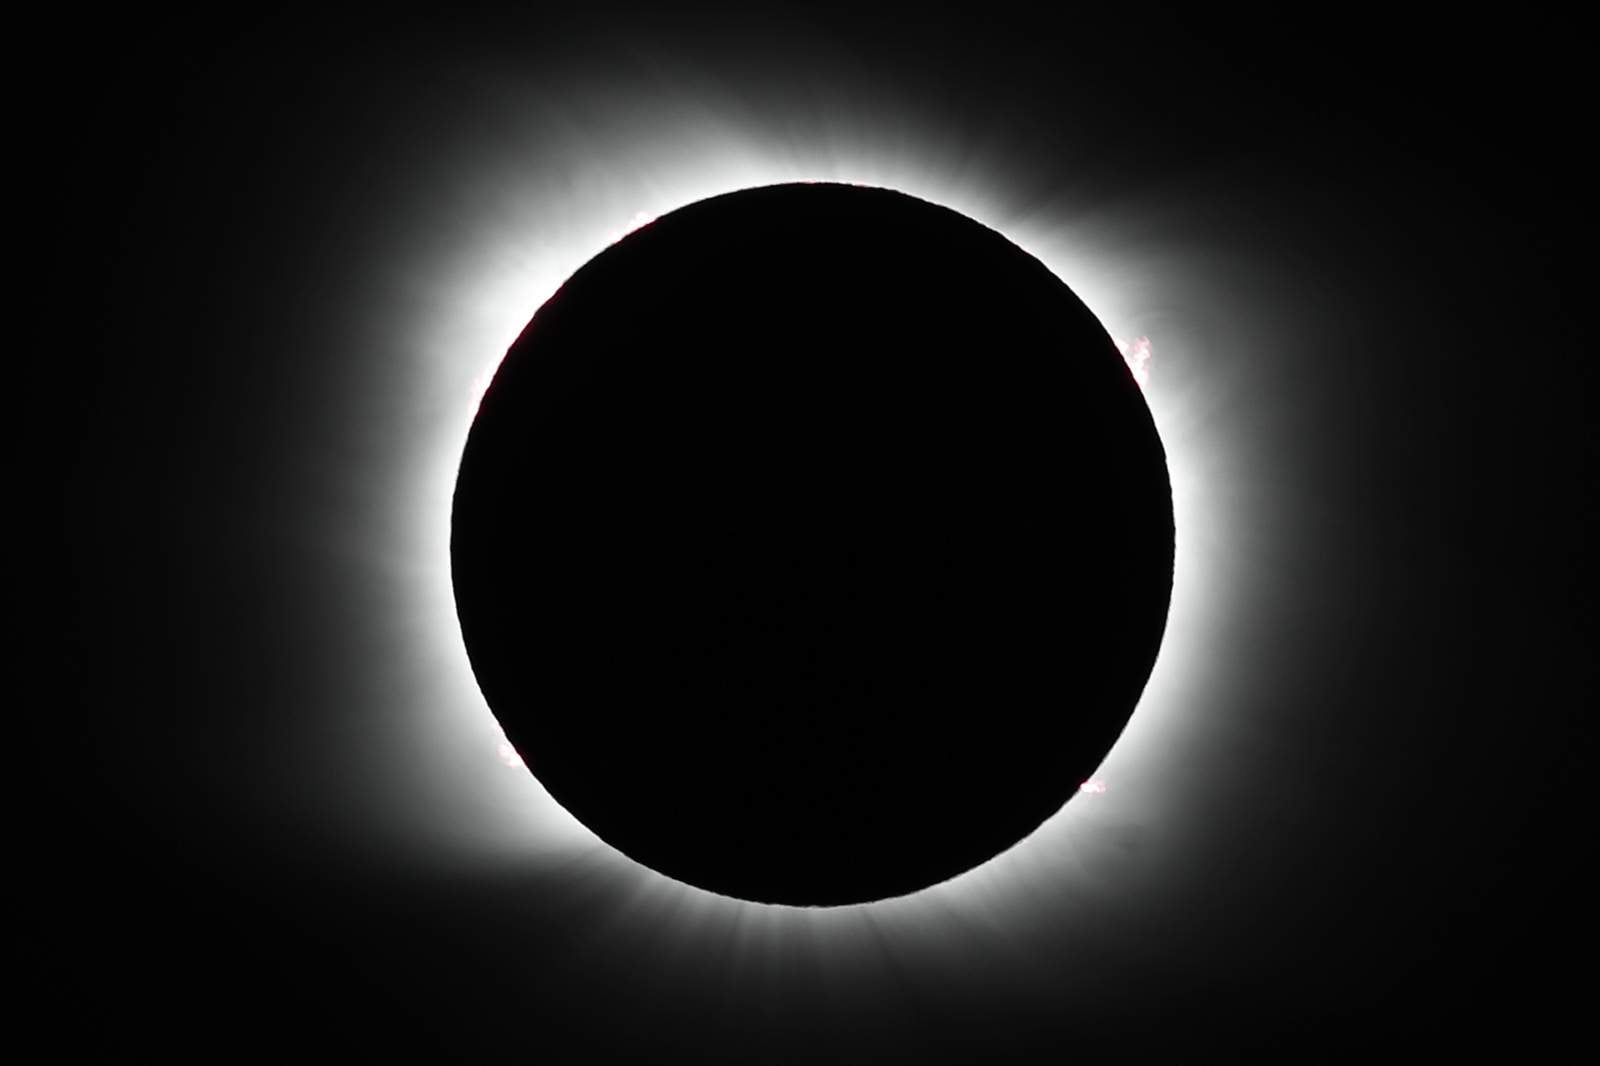 Get your glasses ready! Three years until the Great American Eclipse